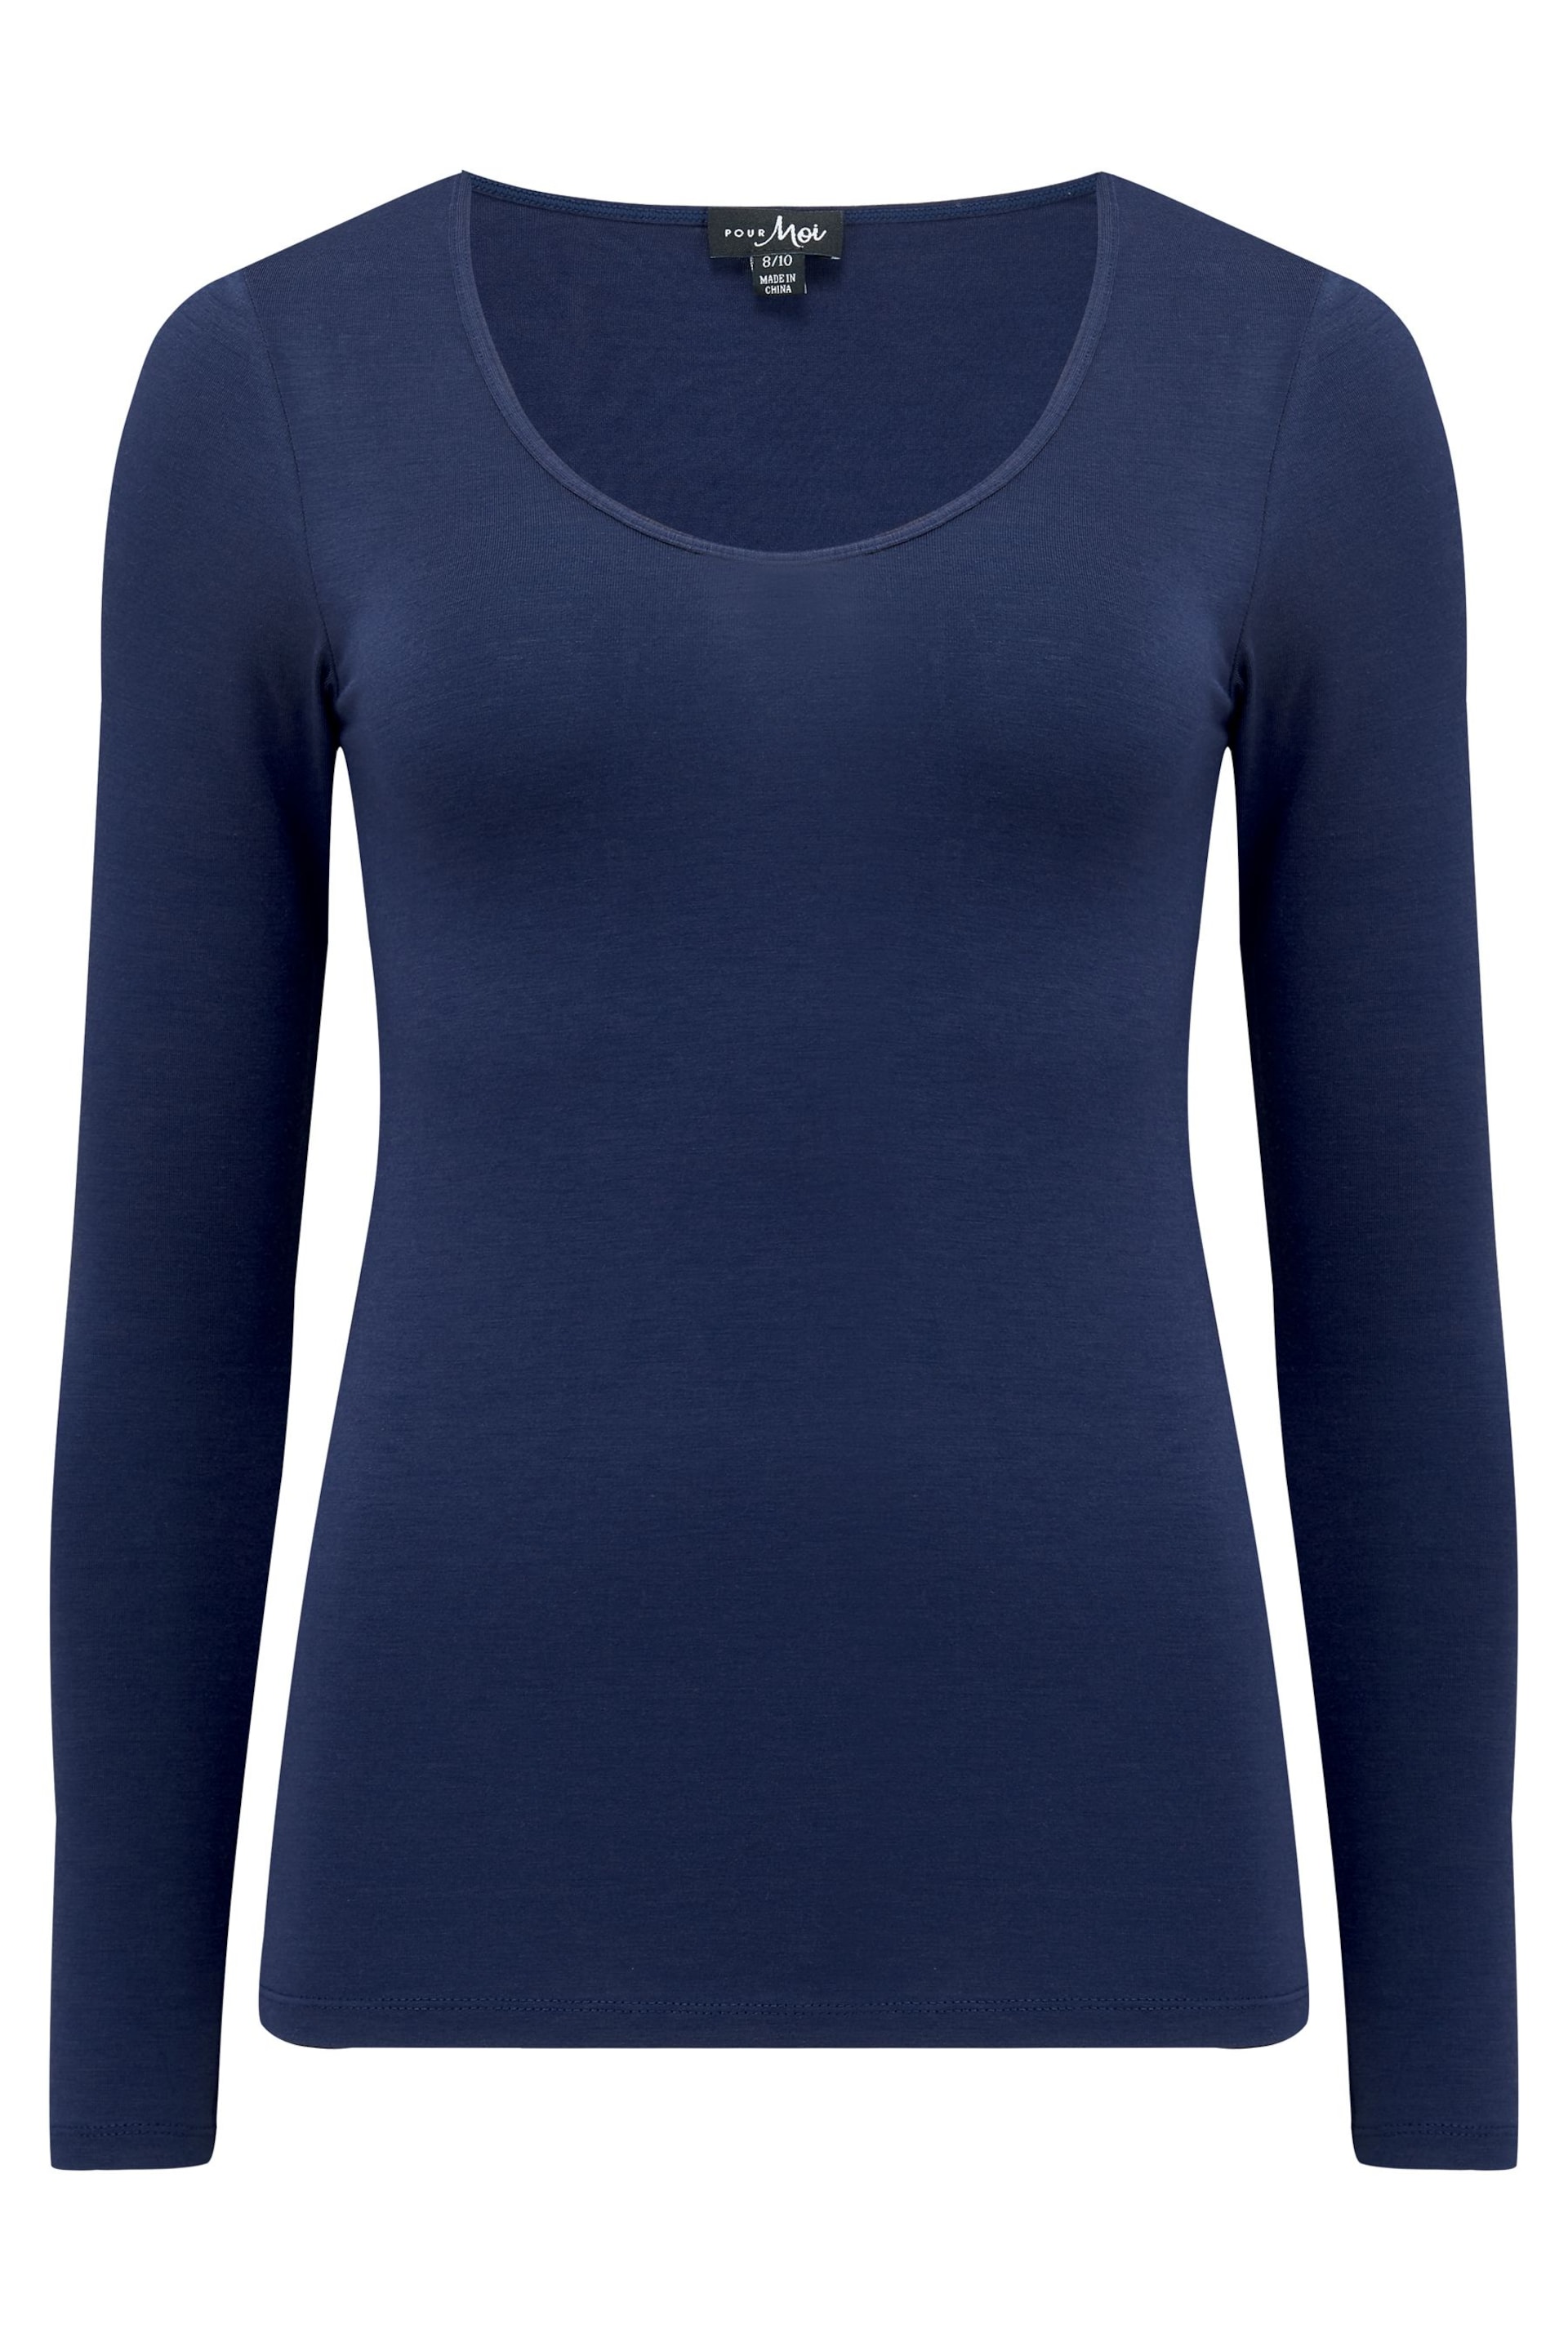 Pour Moi Blue Navy Blue Round Neck - Image 3 of 4